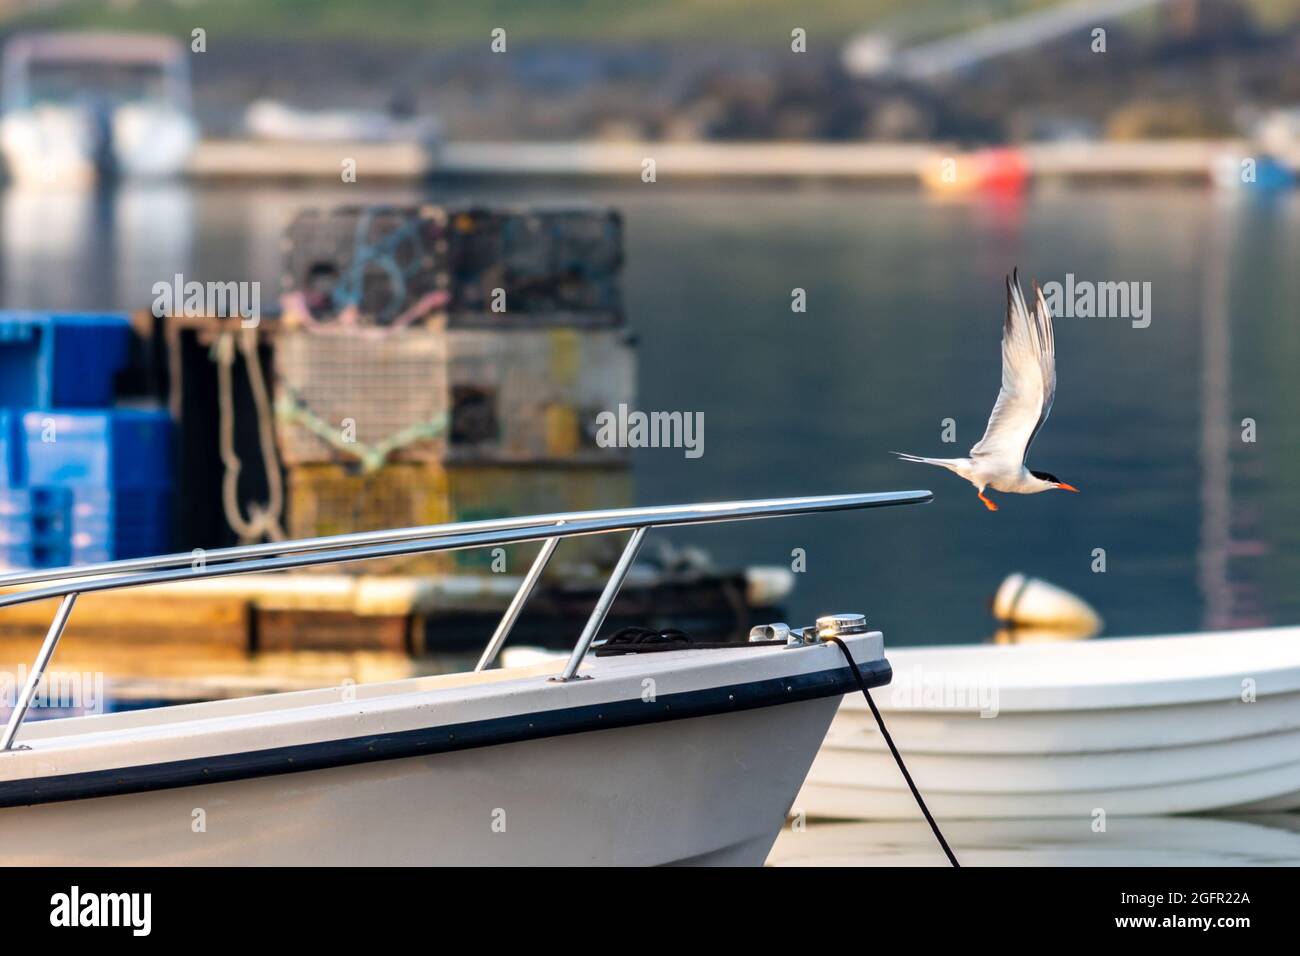 Common Tern perched on boat railing with lobster docks and skiffs on a calm morning in Maine Stock Photo